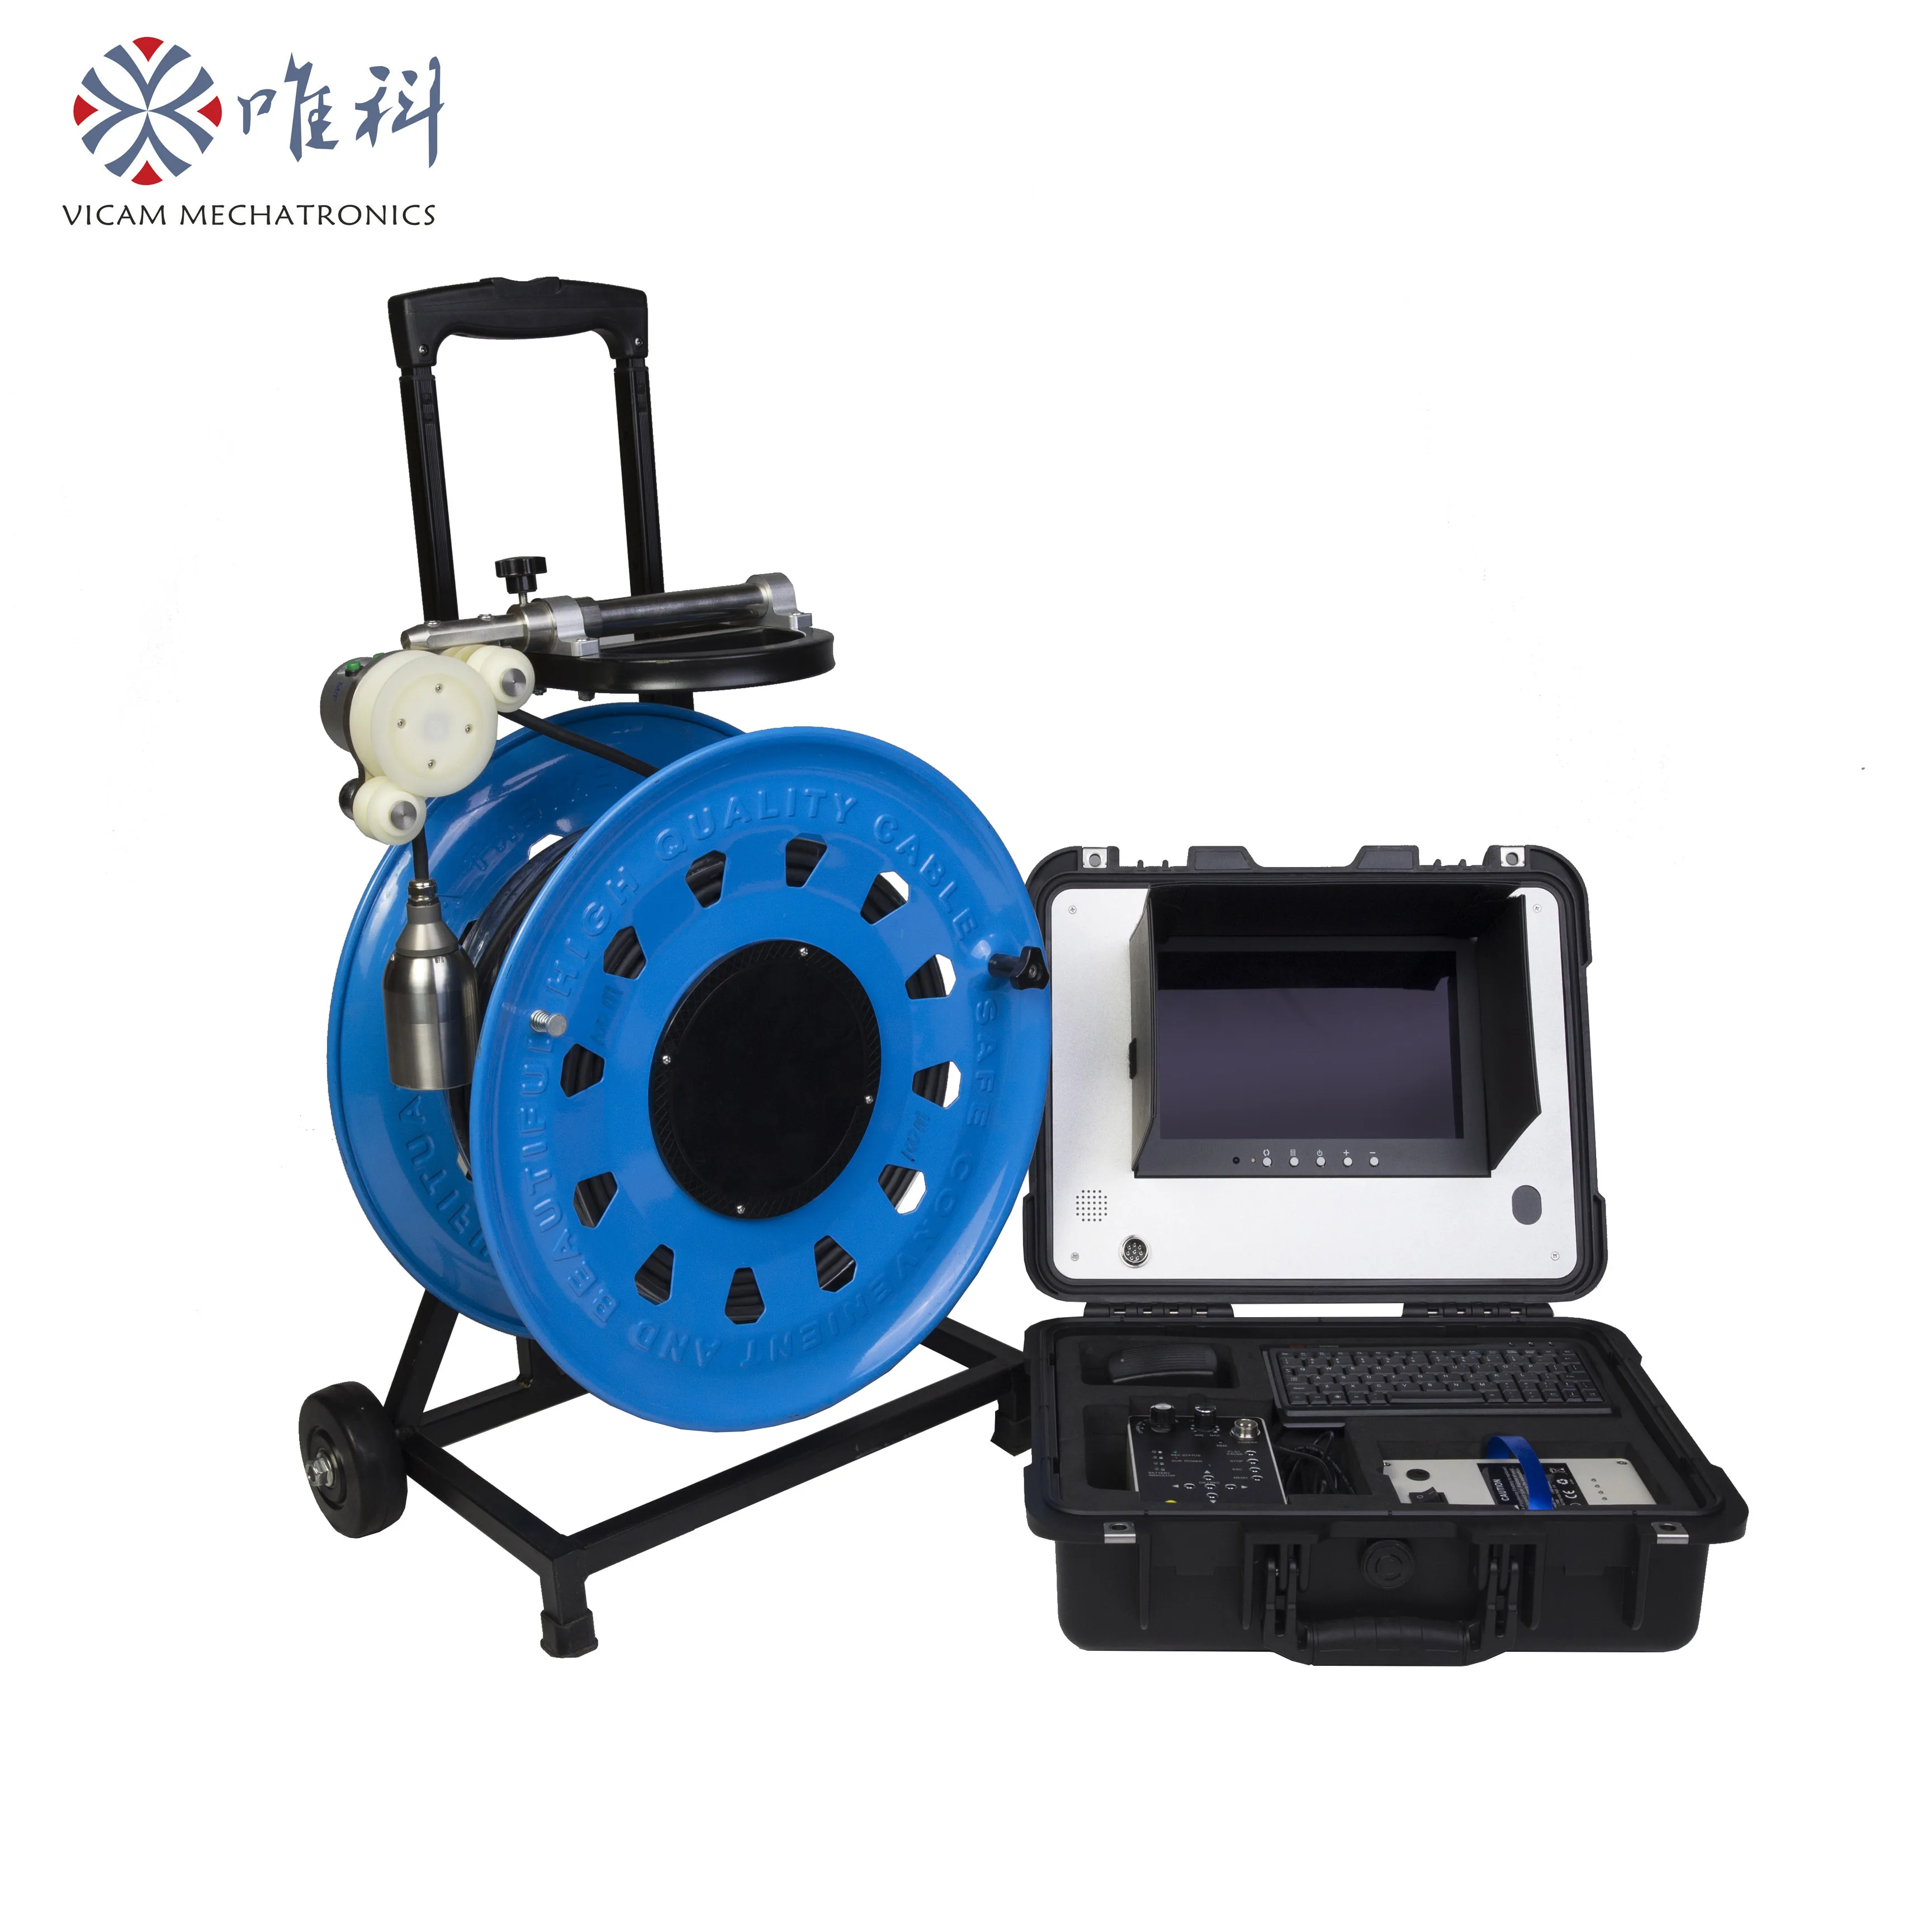 

100m waterproof underwater well inspection camera with 720P Video and 10inch lcd screen V10-100